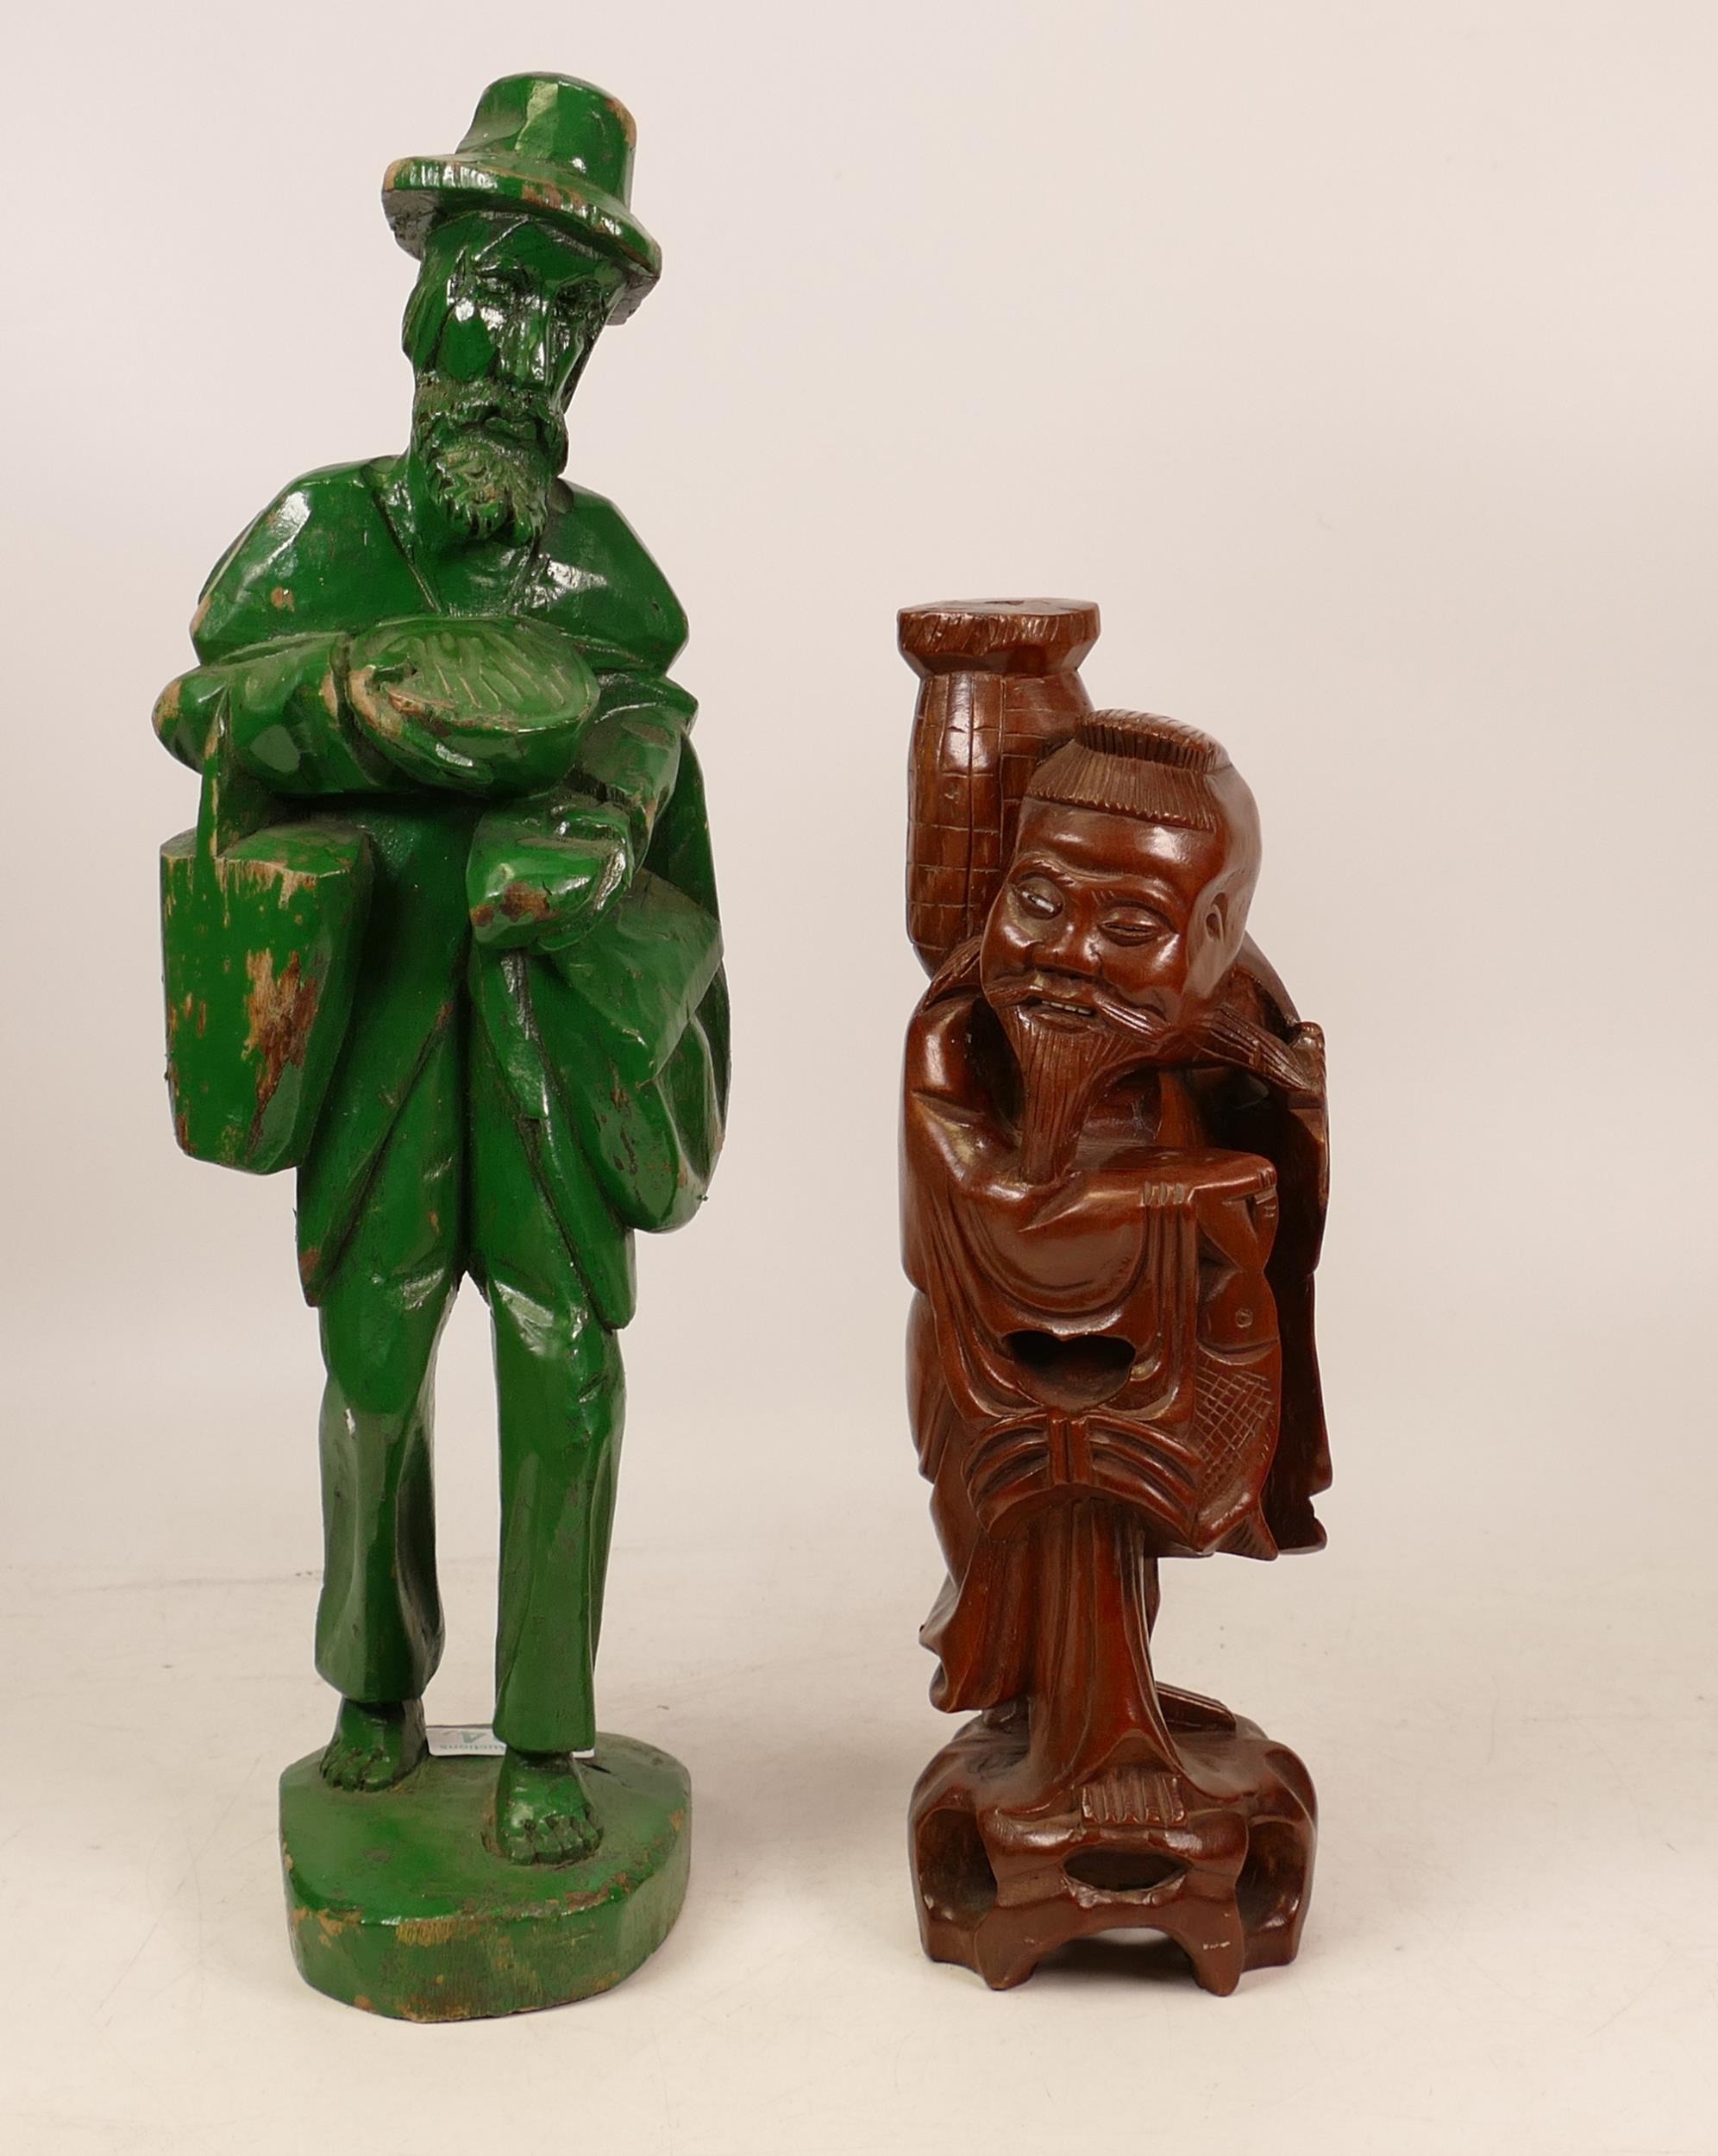 Carved Wooden Figure of a Vagabond painted in Green together with Hardwood Figure of a Eastern